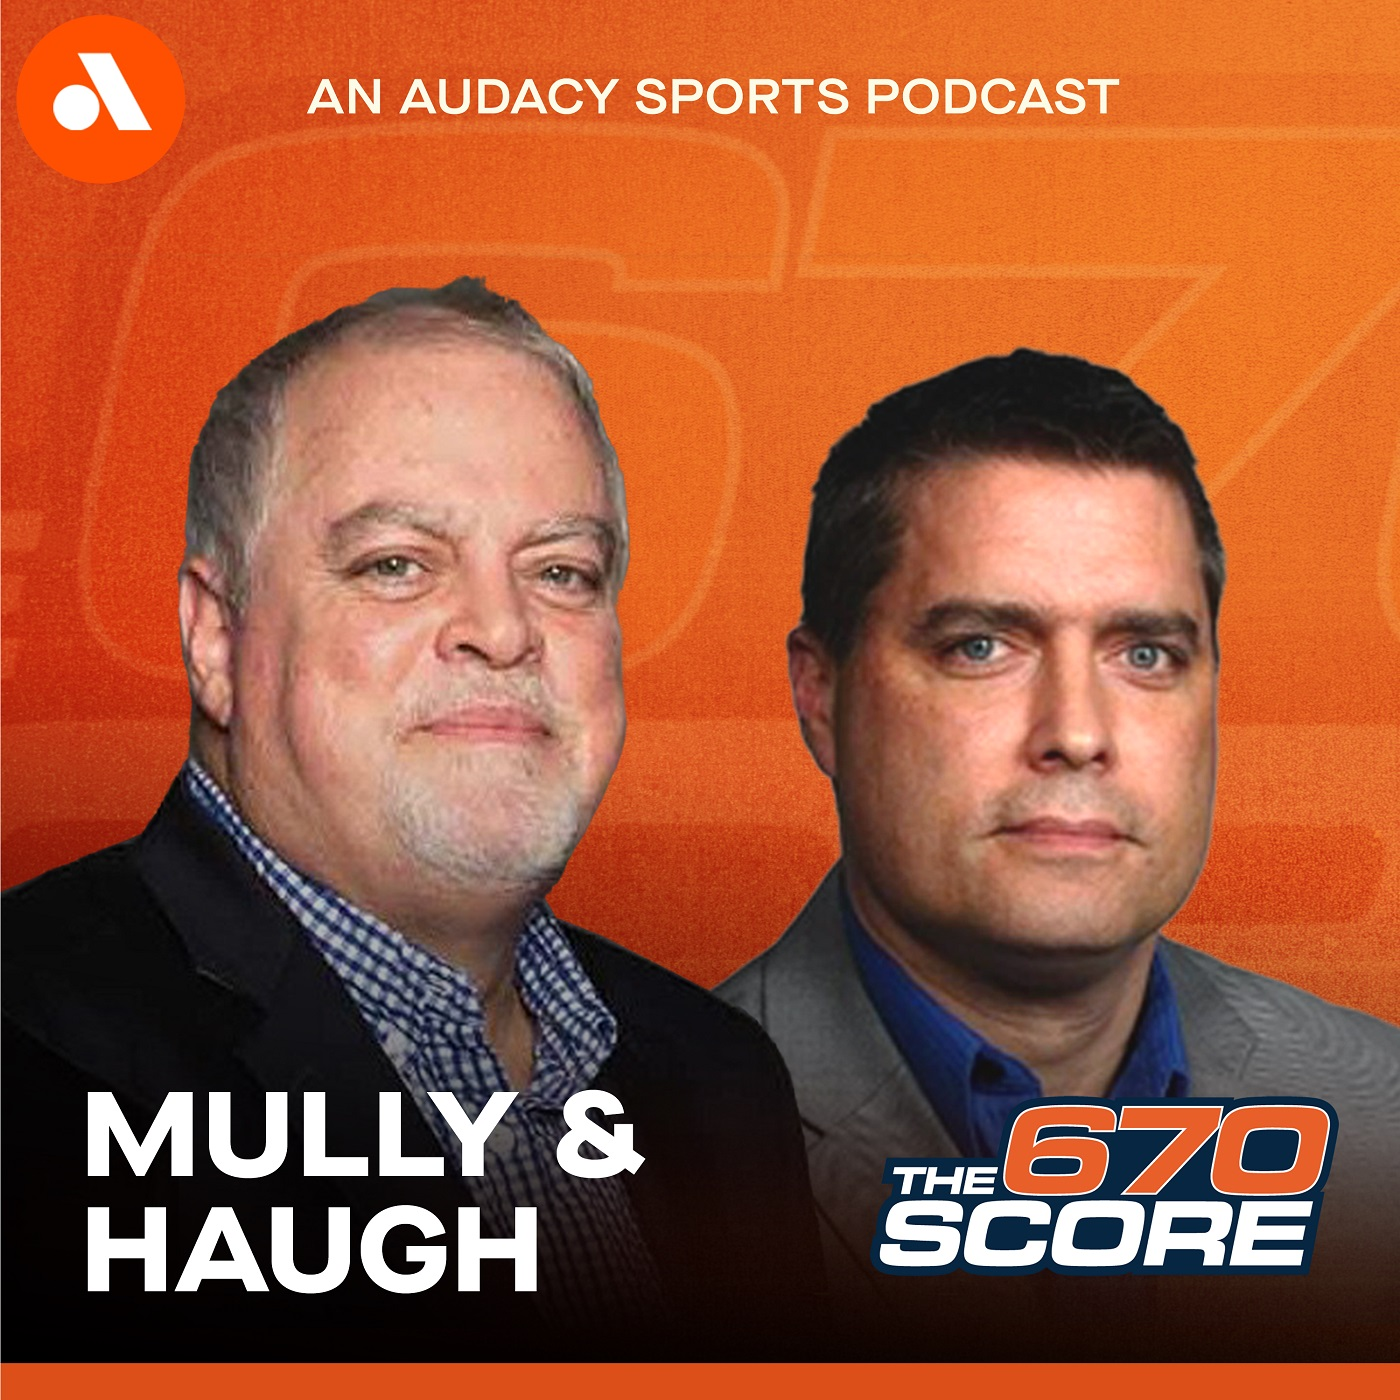 Mully & Haugh: Sean Marshall & Mike Florio interviews (Hour 4)